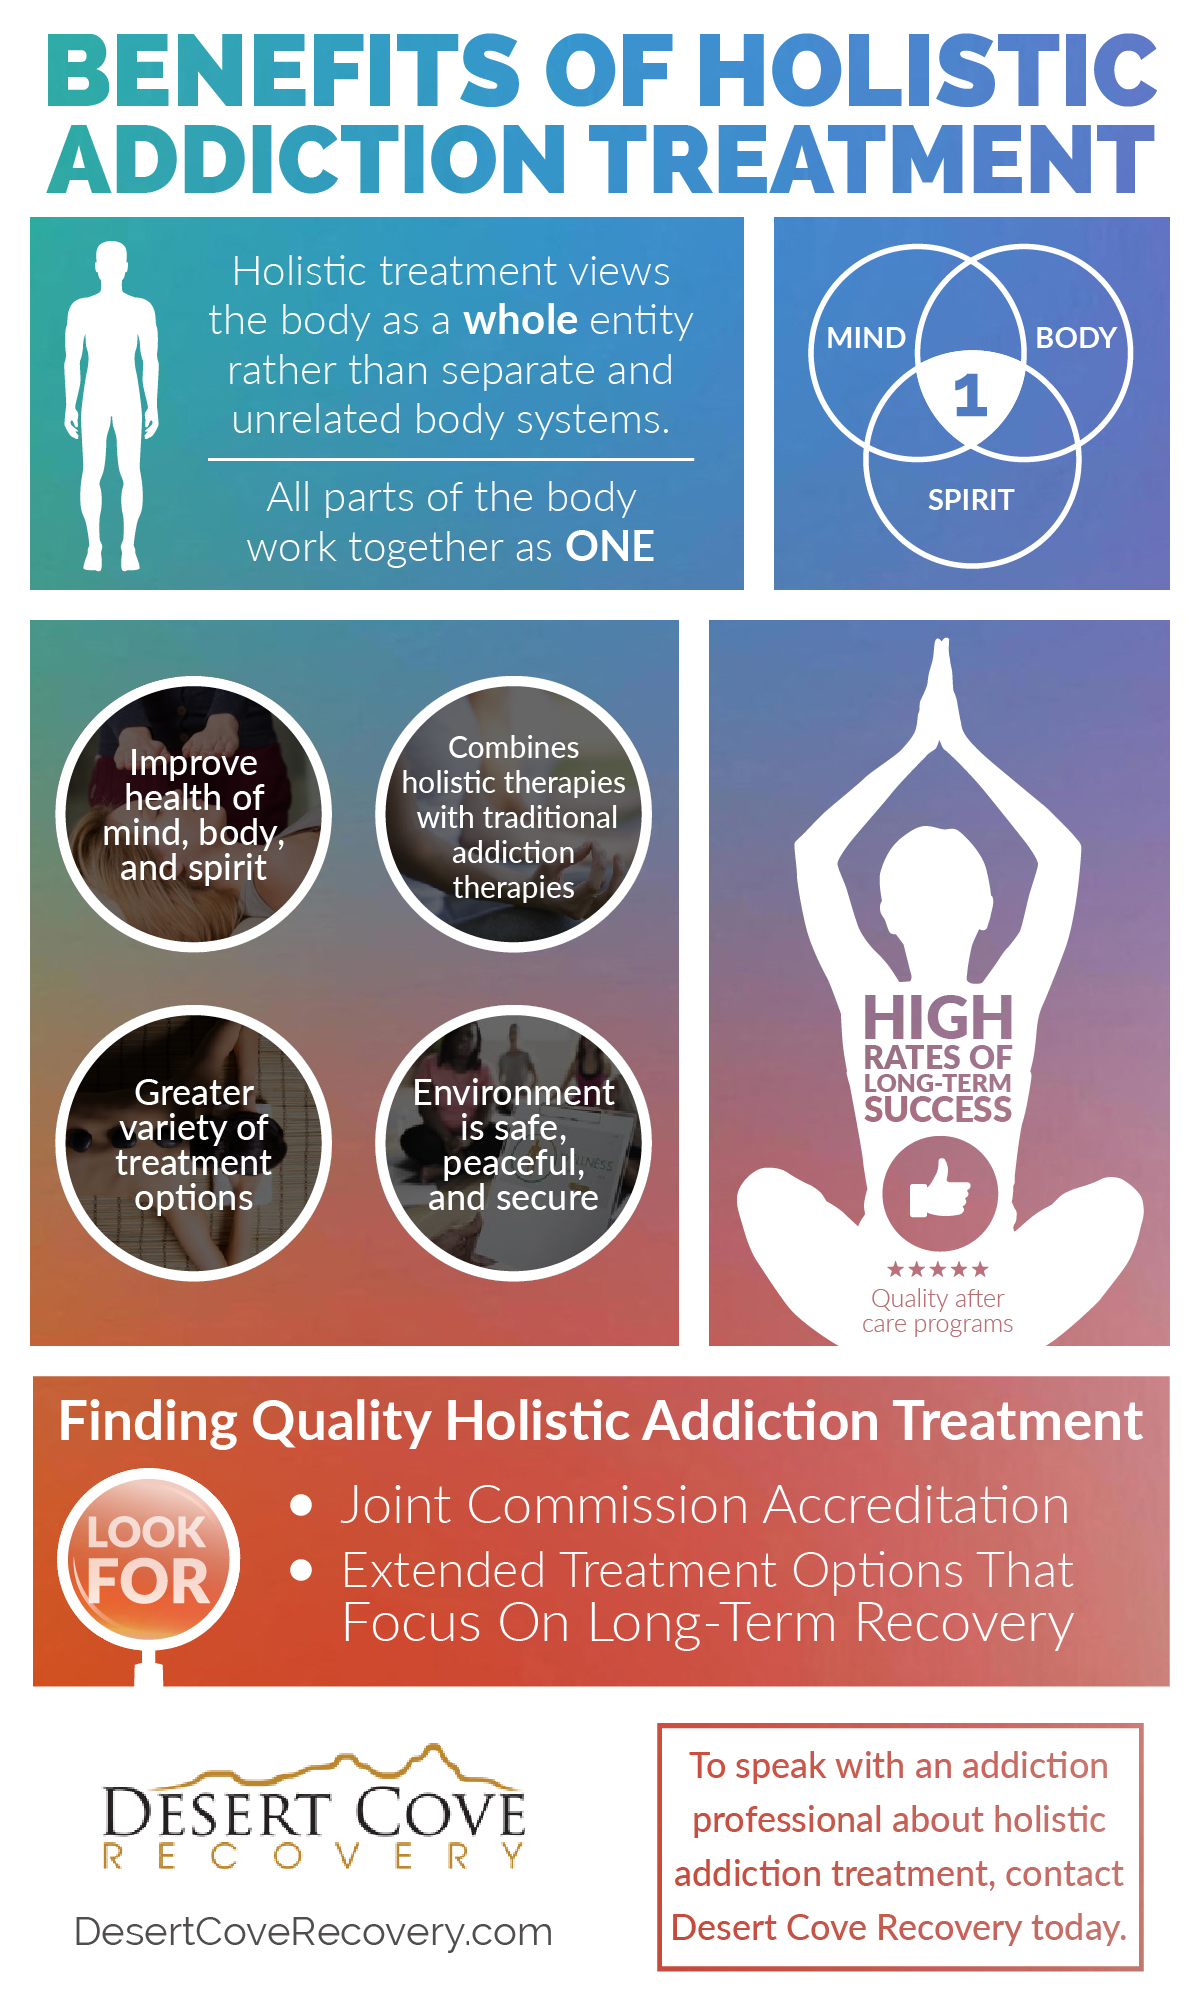 Holistic approaches to addiction recovery